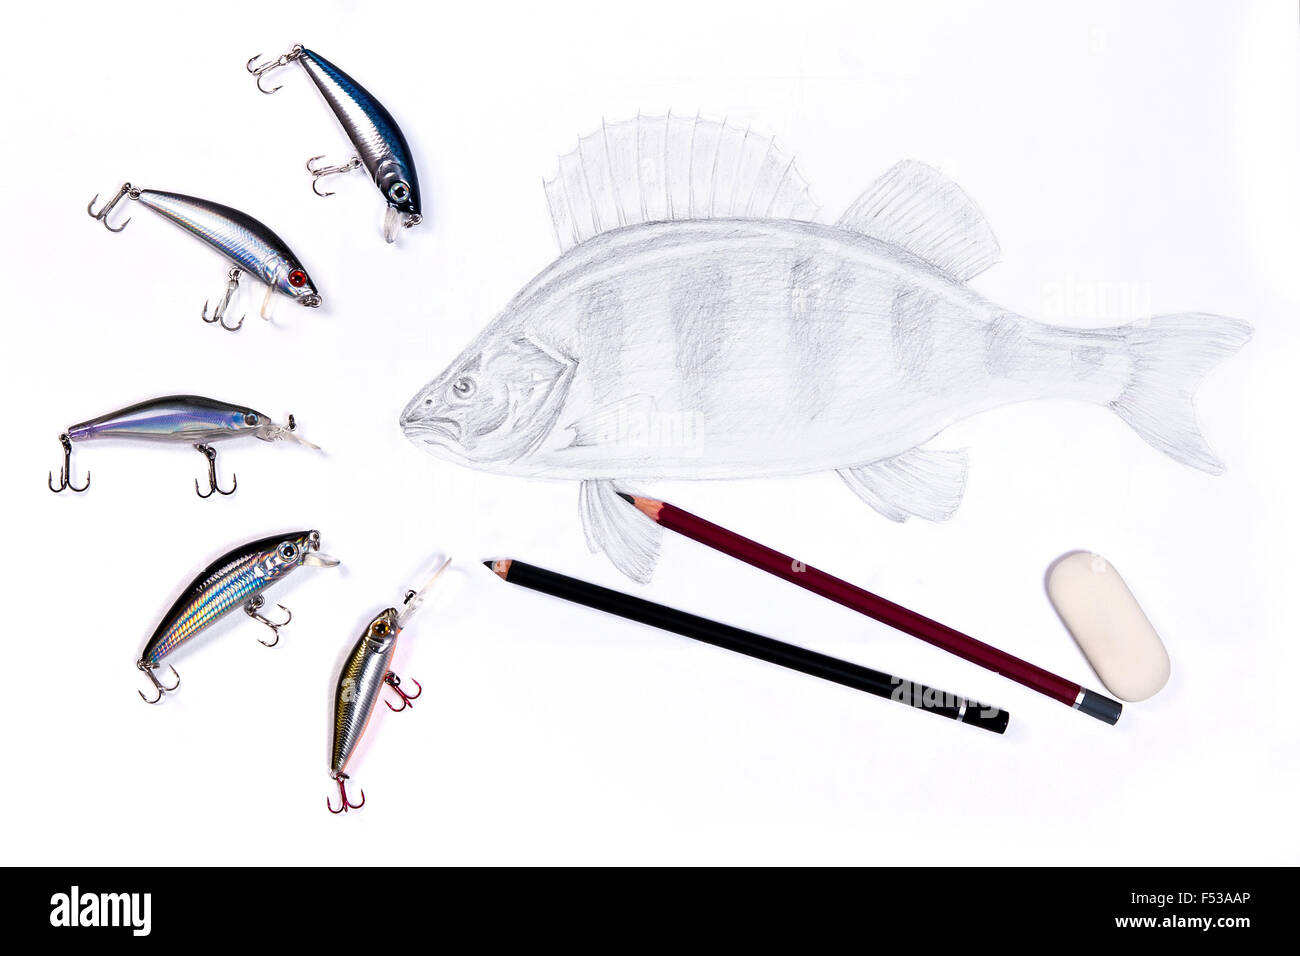 https://c8.alamy.com/comp/F53AAP/different-kinds-of-fishing-plastic-baits-with-drawing-perch-on-the-F53AAP.jpg